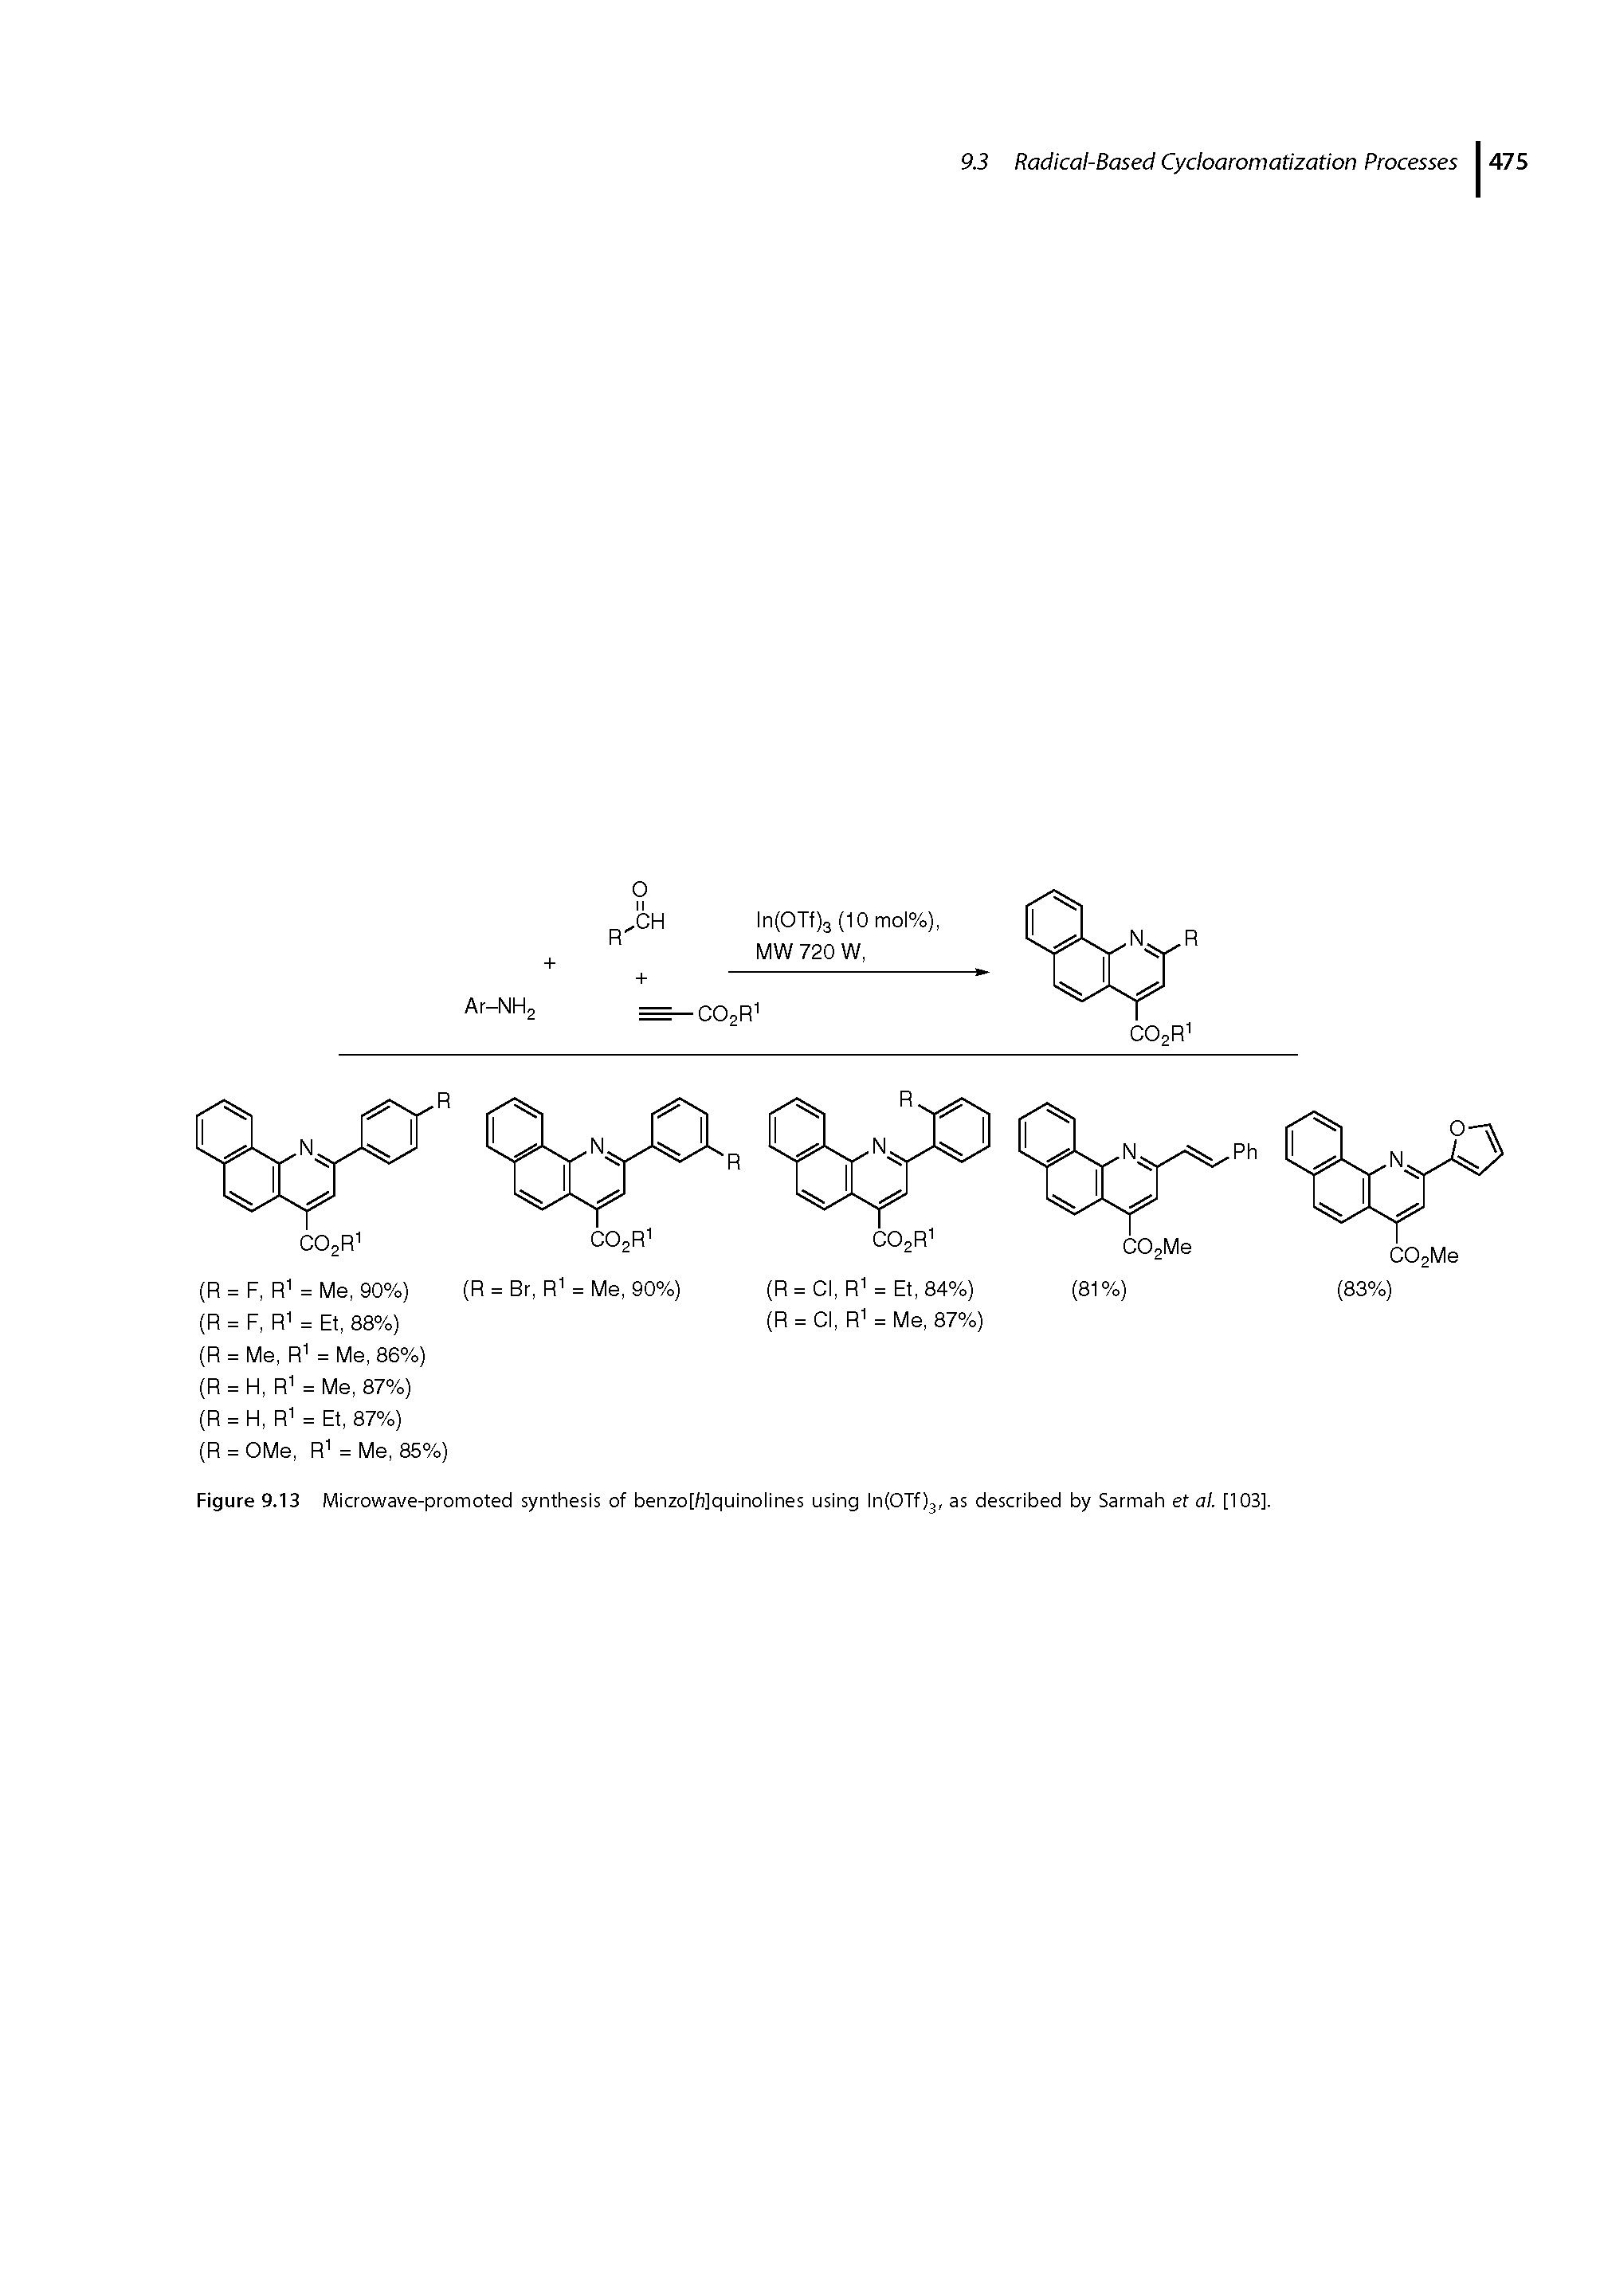 Figure 9.13 Microwave-promoted synthesis of benzo[/i]quinolines using ln(OTf)3, as described by Sarmah et al. [103].